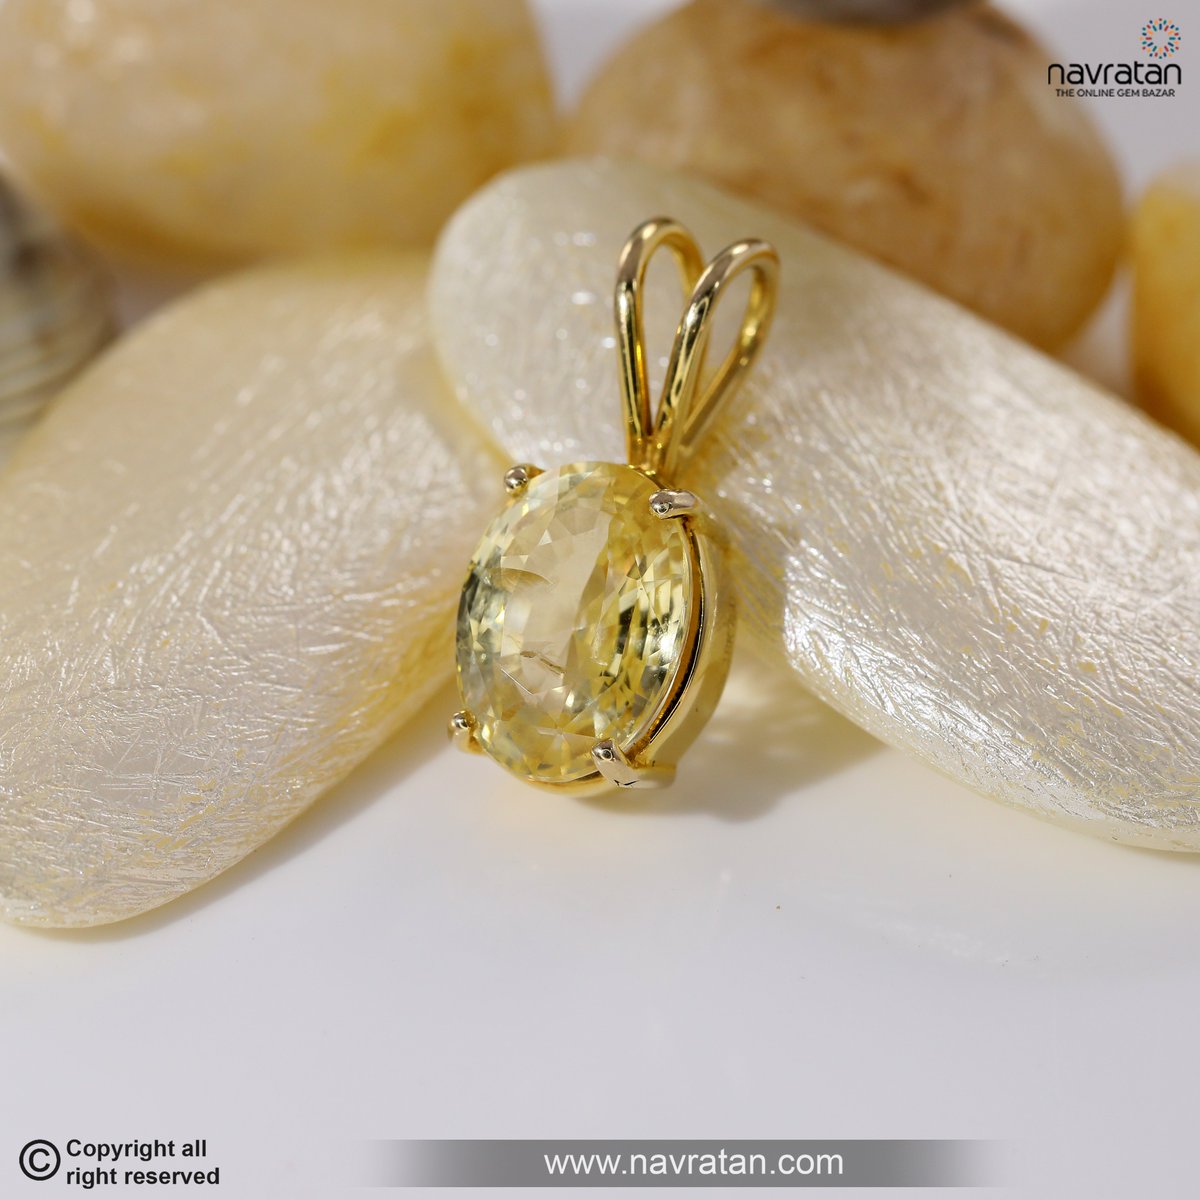 Sparkling up the season with this beautiful yellow sapphire gemstone pendant.

Follow for More..

#yellowsapphire #GemstonePendant #yellowsapphirejewelry #handmade #yellowsapphirependant #jewelrylover #jewelryaddict #jewelryoftheday #navratan
#reels2023 #stayhome